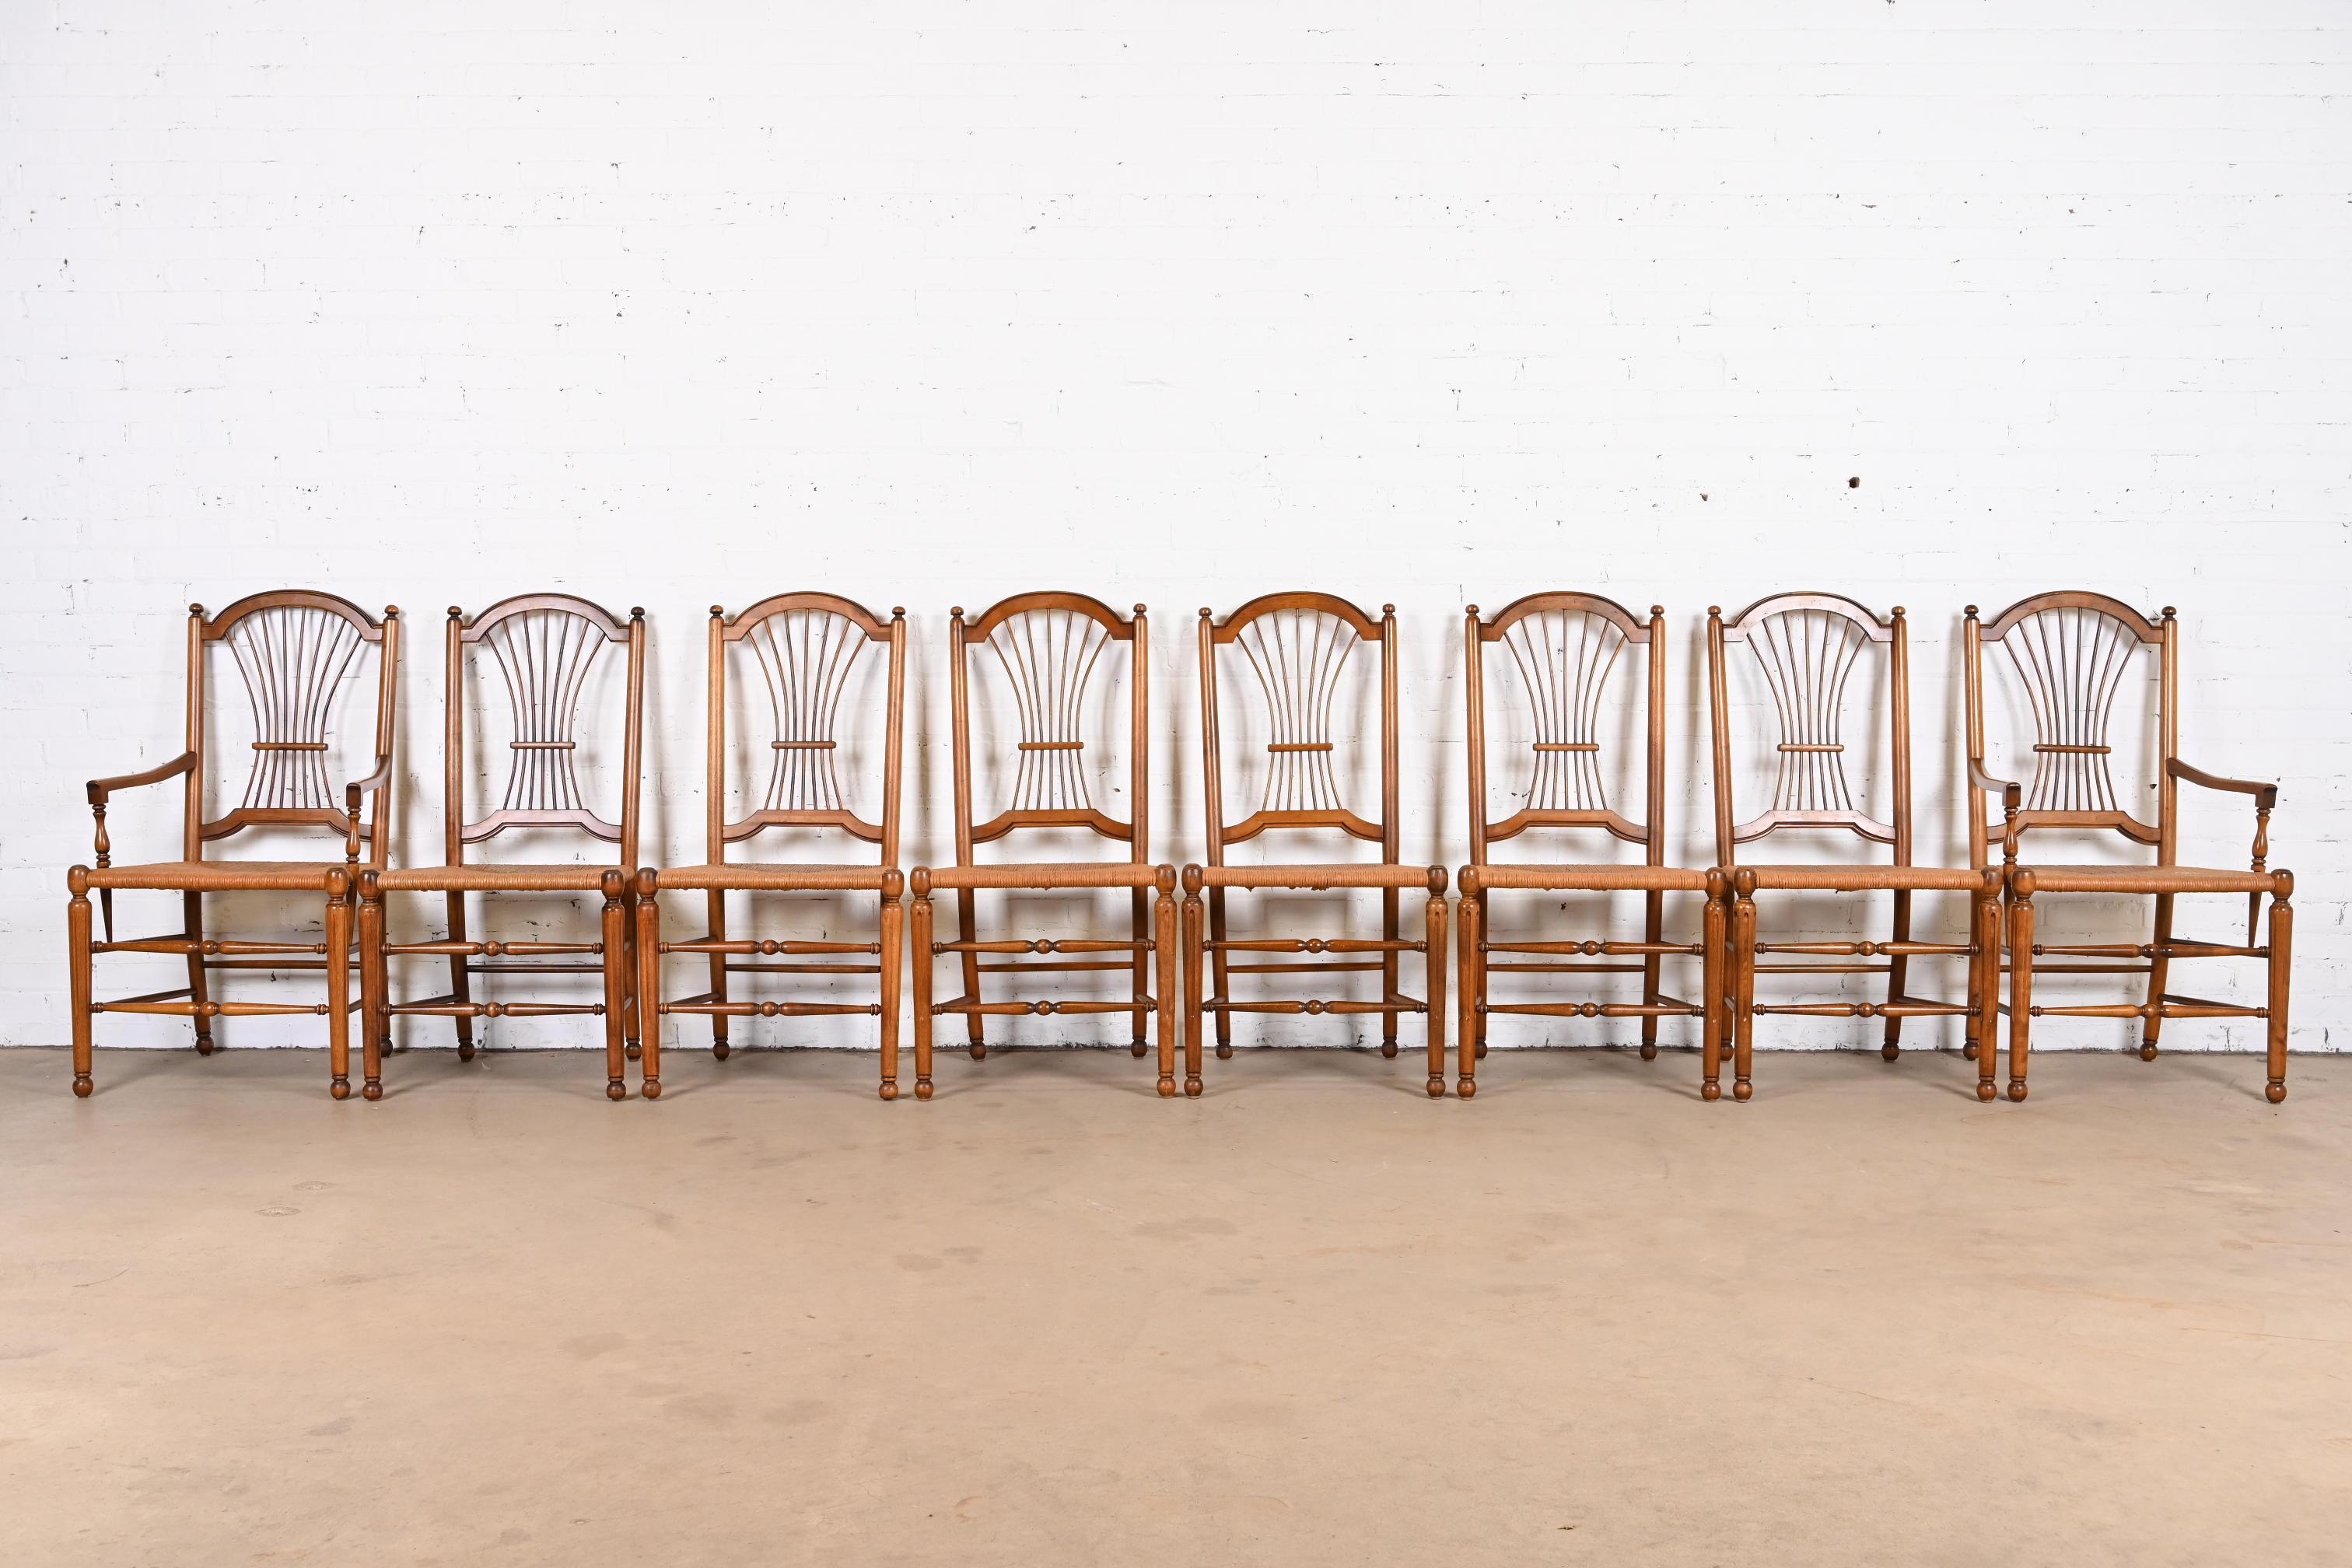 An outstanding set of eight French Provincial or Country French dining chairs

USA, Late 20th century

Carved solid birch frames, with rush seats.

Measures:
Side chairs - 20.5